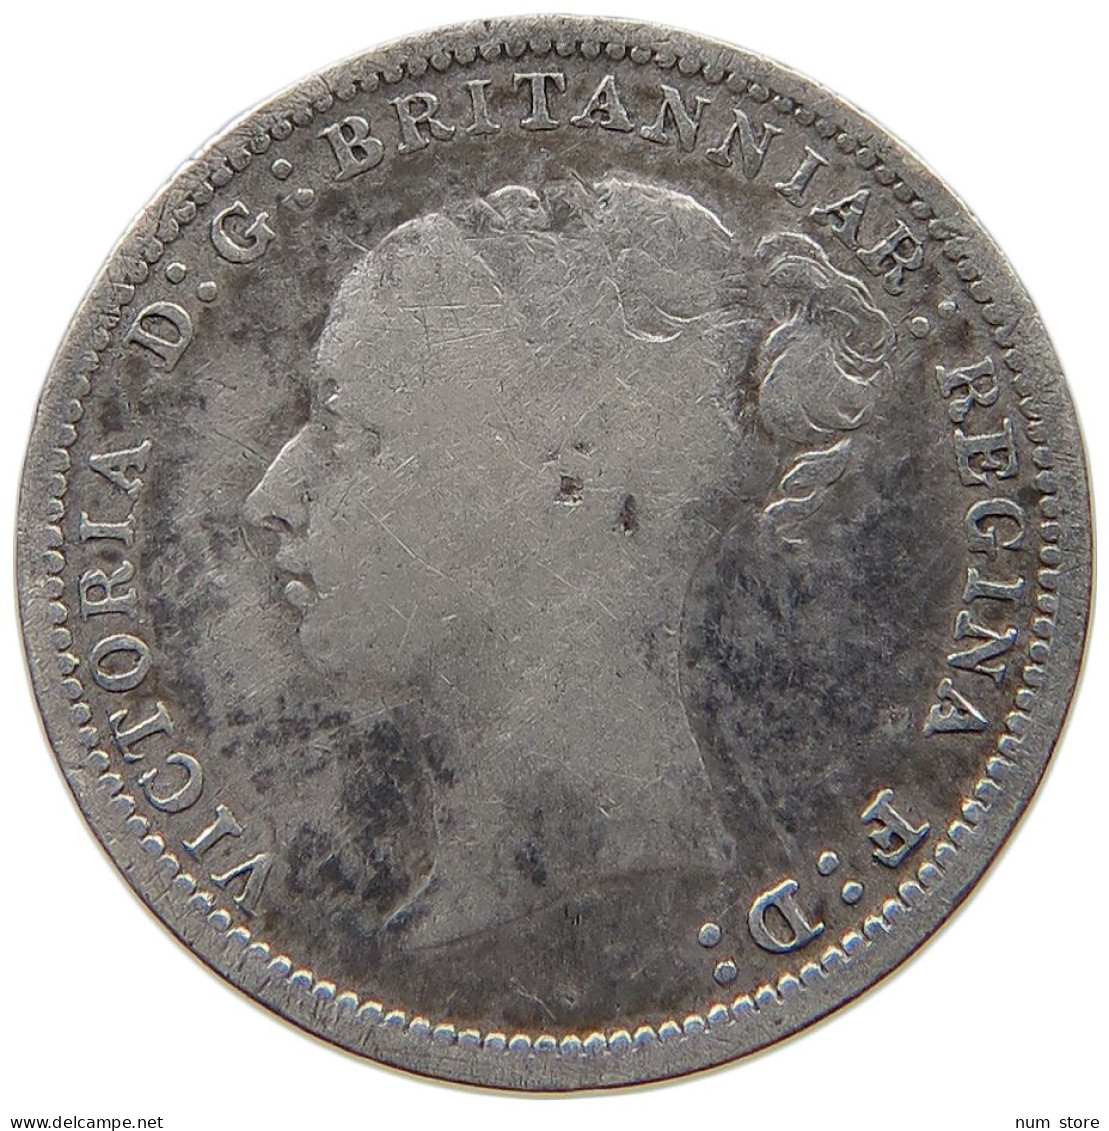 GREAT BRITAIN THREEPENCE 1886 Victoria 1837-1901 #c052 0263 - F. 3 Pence